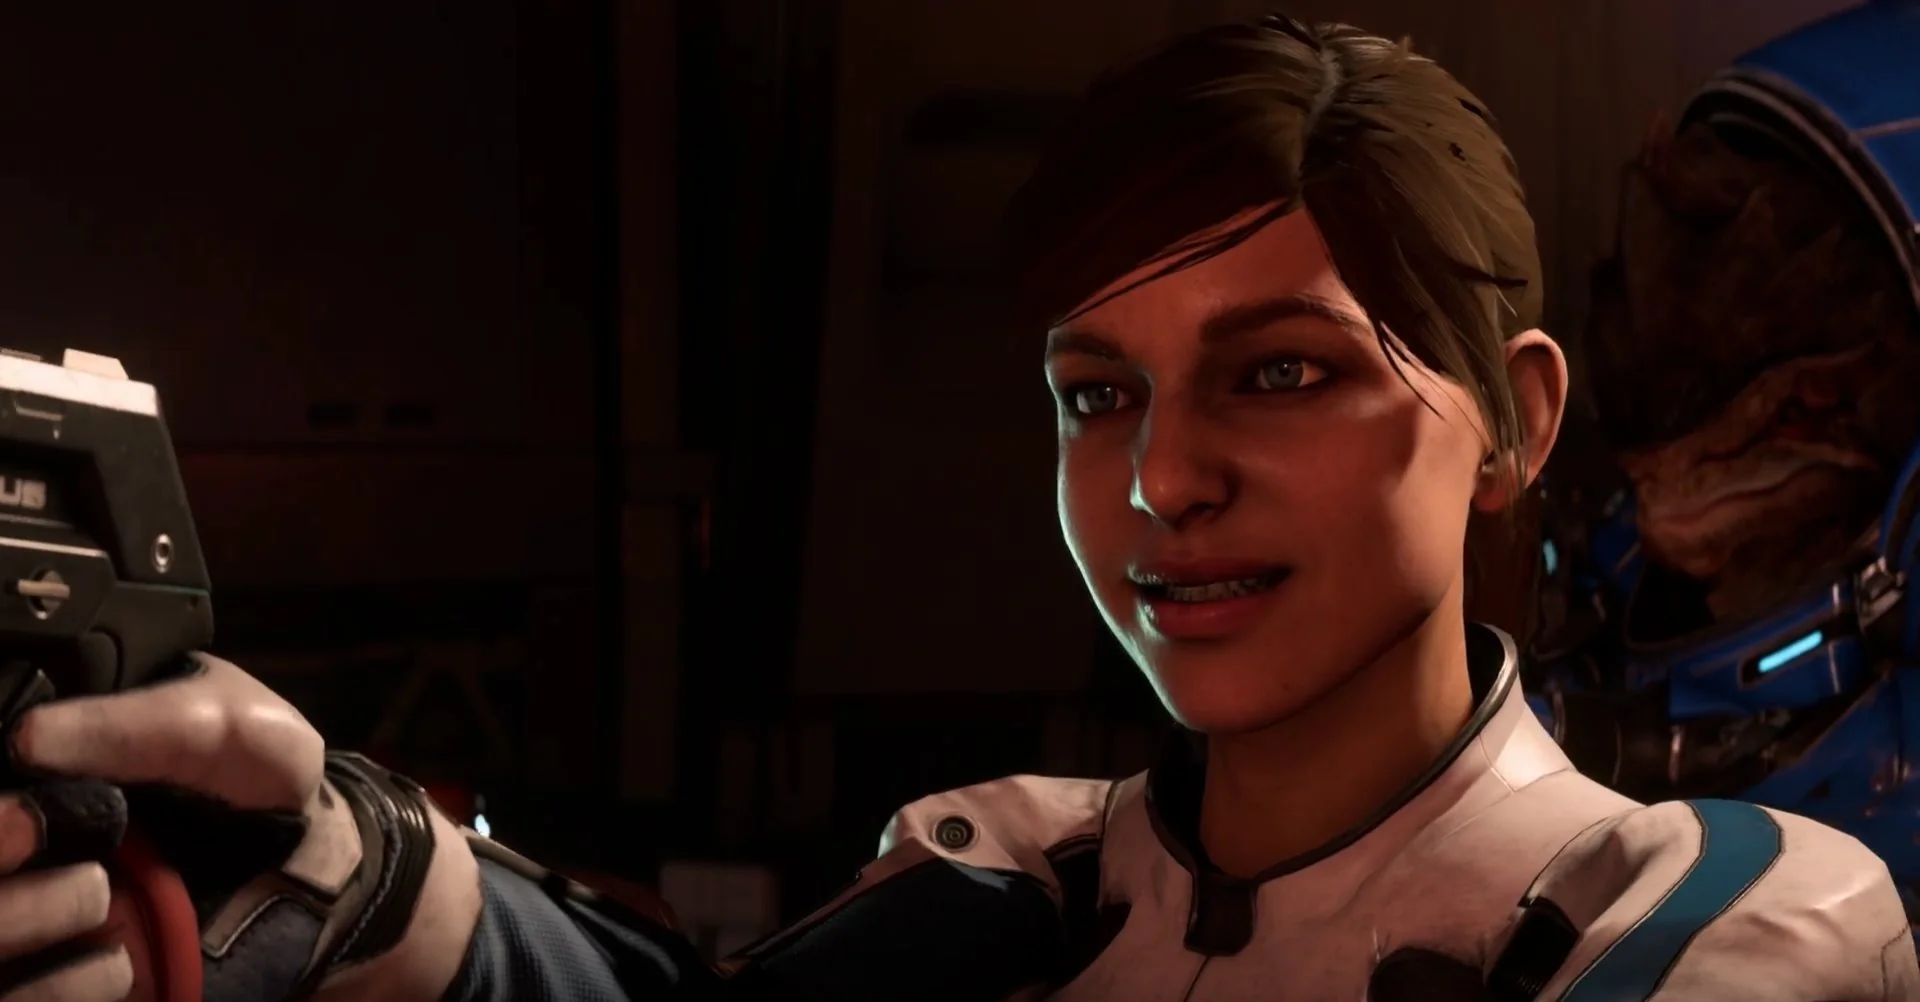 Fem Ryder is one of the worst and ugliest female characters in video games.